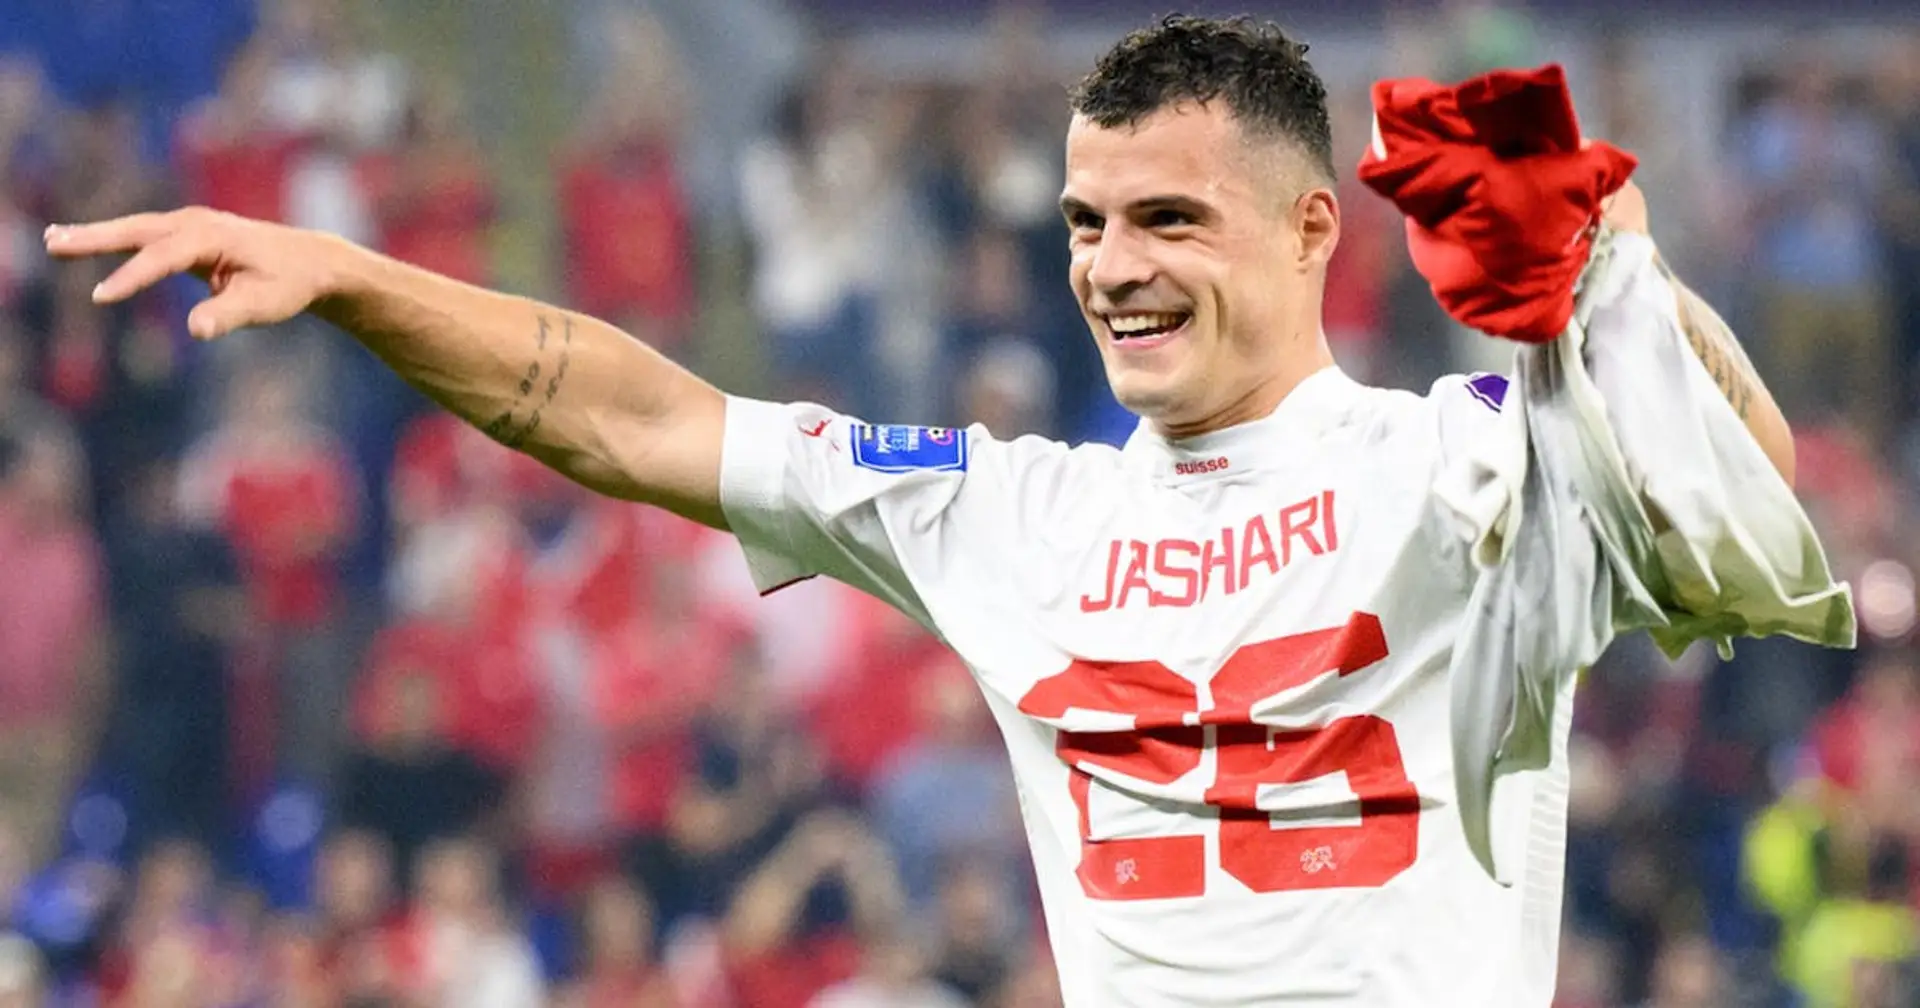 Xhaka heads straight to Dubai & 2 more big Arsenal stories you might've missed